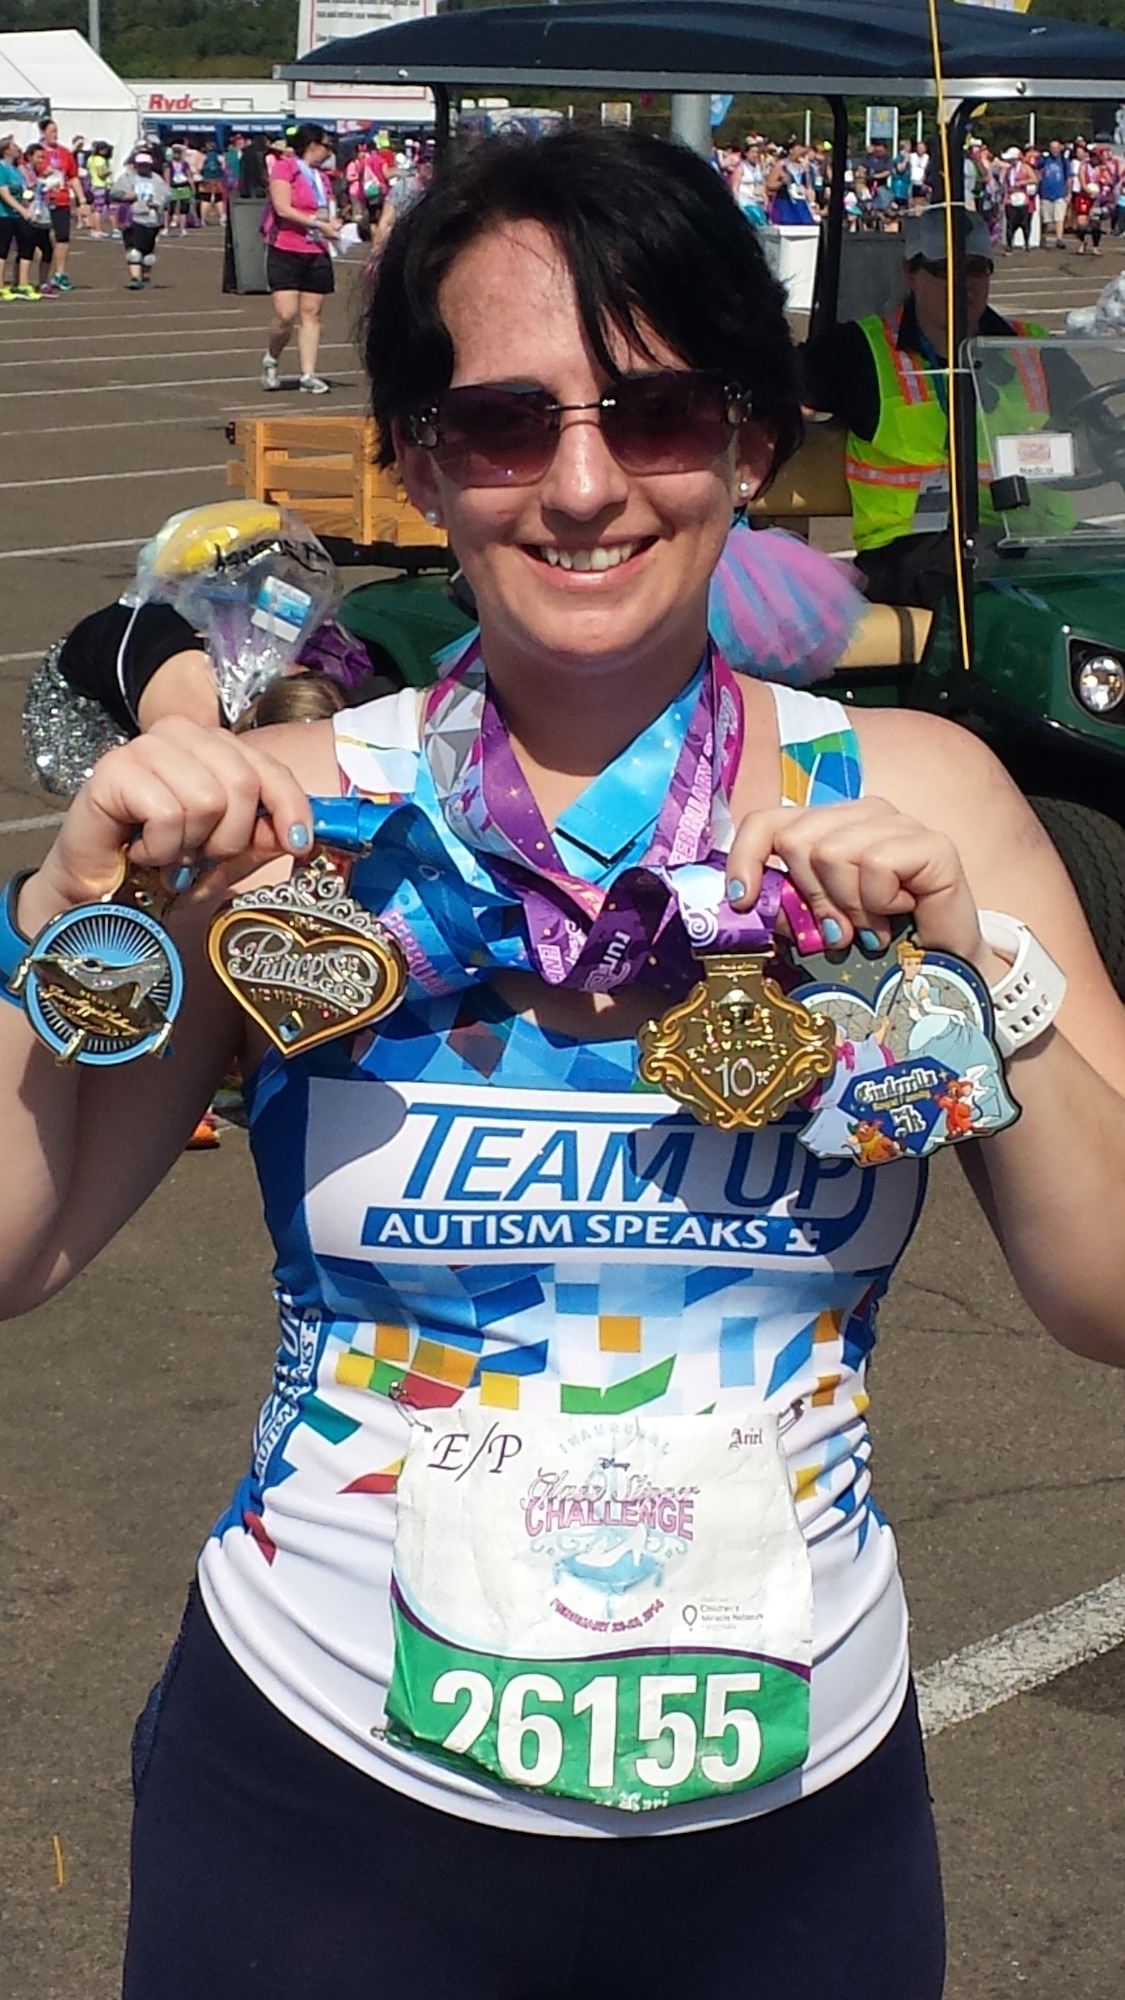 Kari Schwendenman, spouse of U.S. Air Force Staff Sgt. Brandon Schwendenman, holds up medals after completing the glass slipper challenge in Orlando, Fla., Feb. 23, 2014. Schwendenman ran the challenge for an organization that raises money for families with an autistic child. (courtesy photo) 
